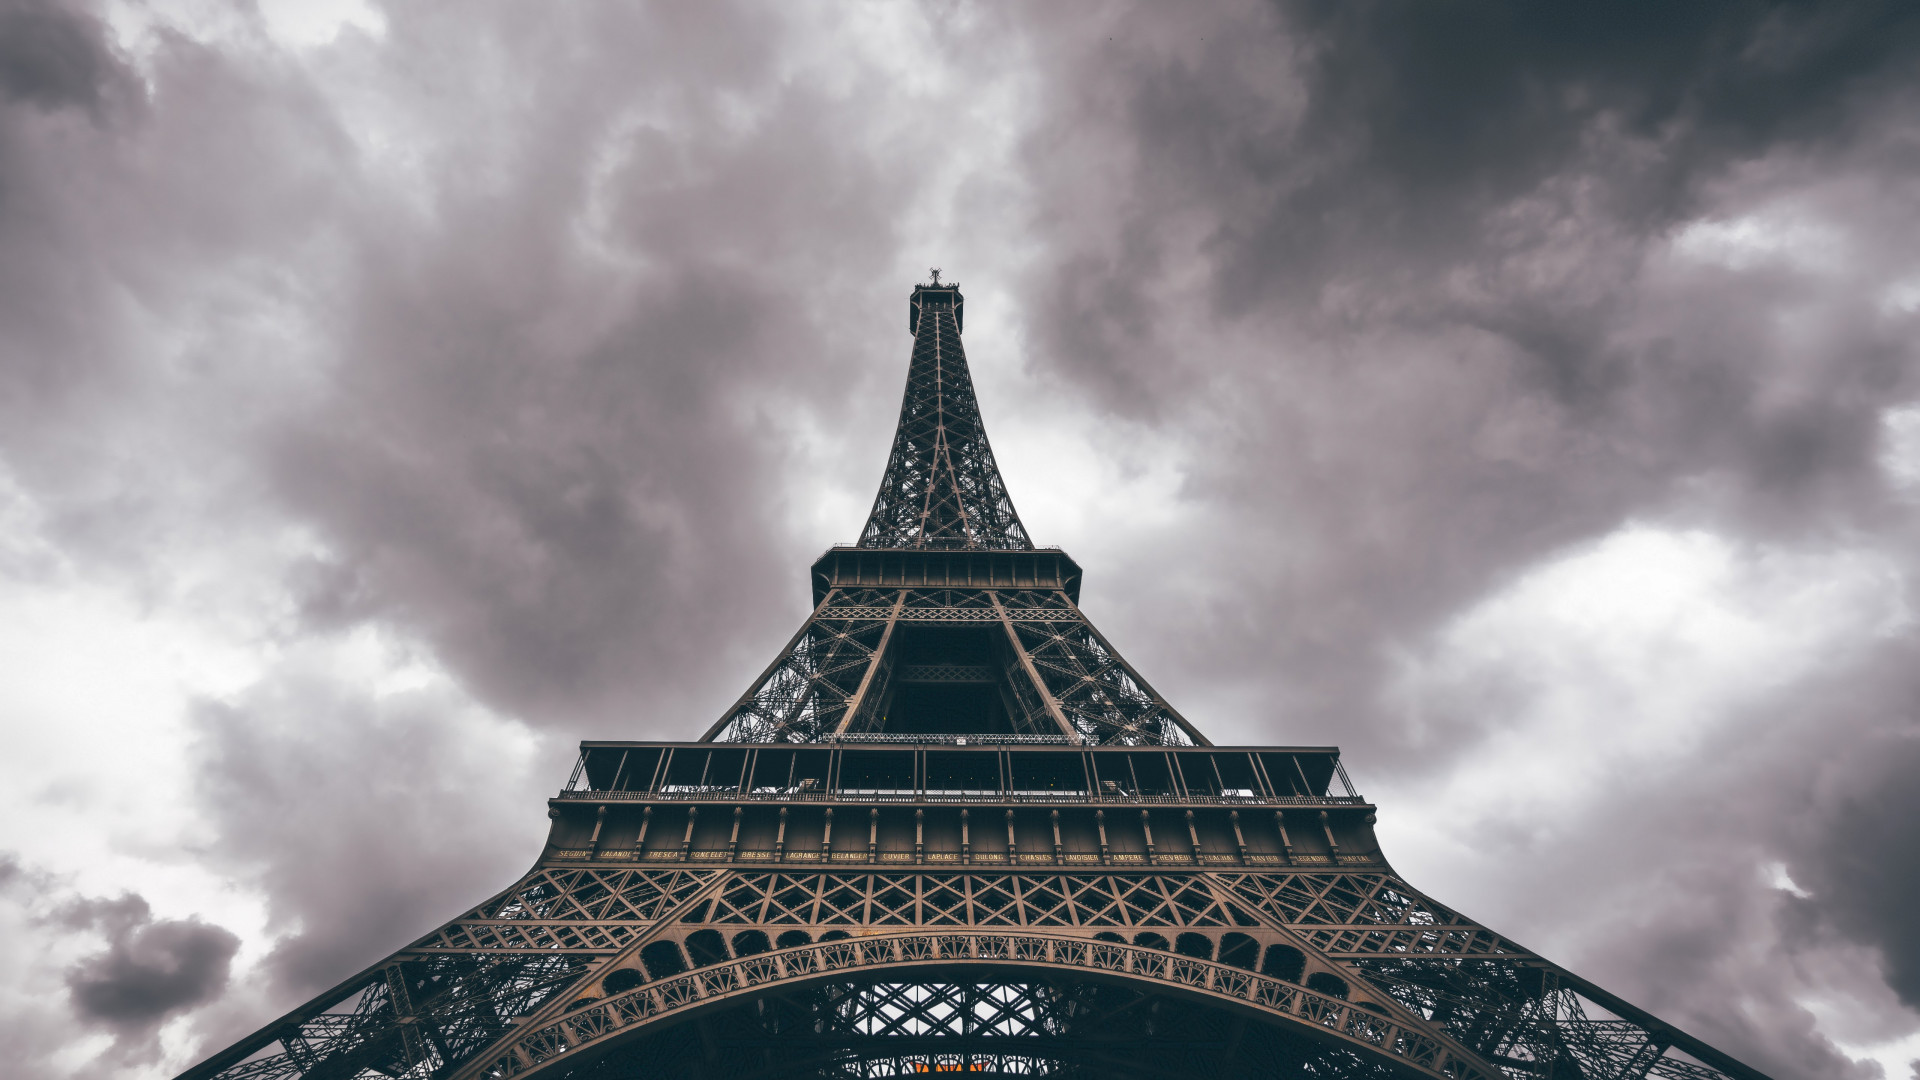 Eiffel Tower in a cloudy day wallpaper 1920x1080